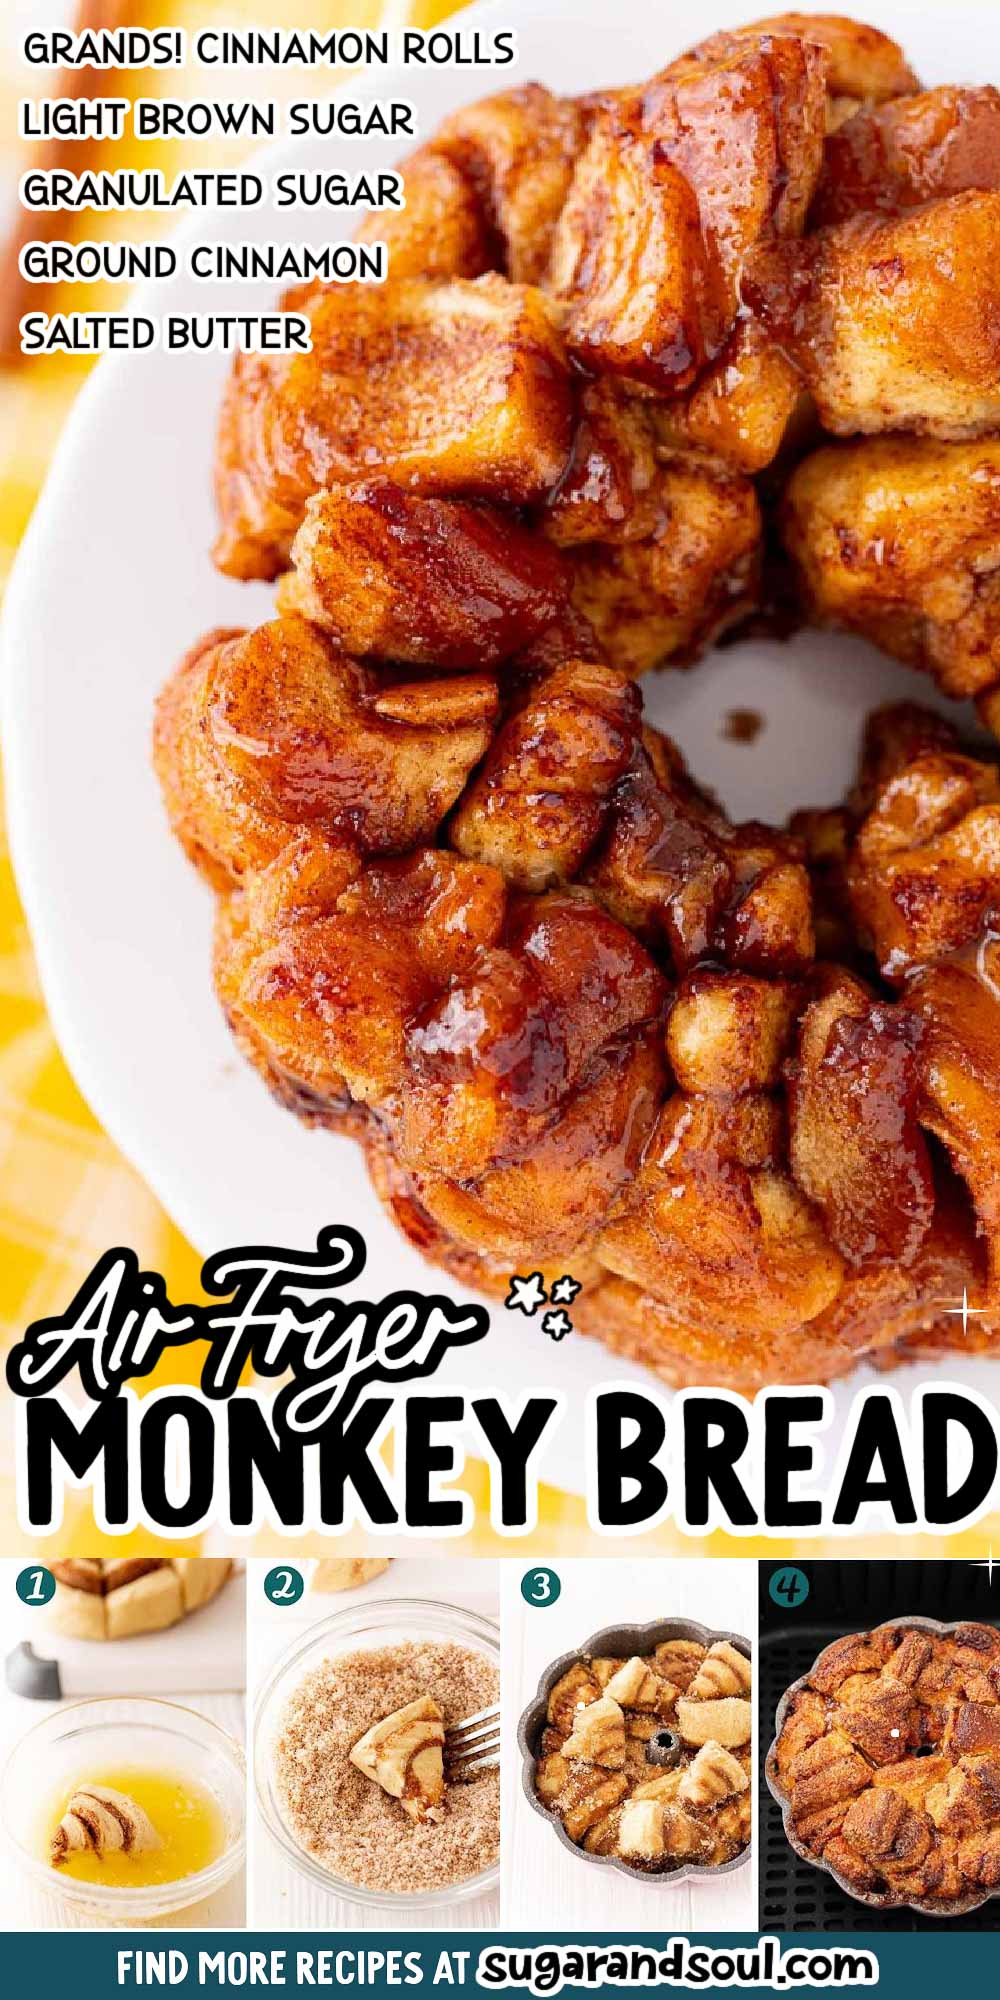 Air Fryer Monkey Bread uses canned cinnamon rolls and 4 more ingredients to deliver a lightly crisped sweet treat that cooks in 15 minutes! via @sugarandsoulco